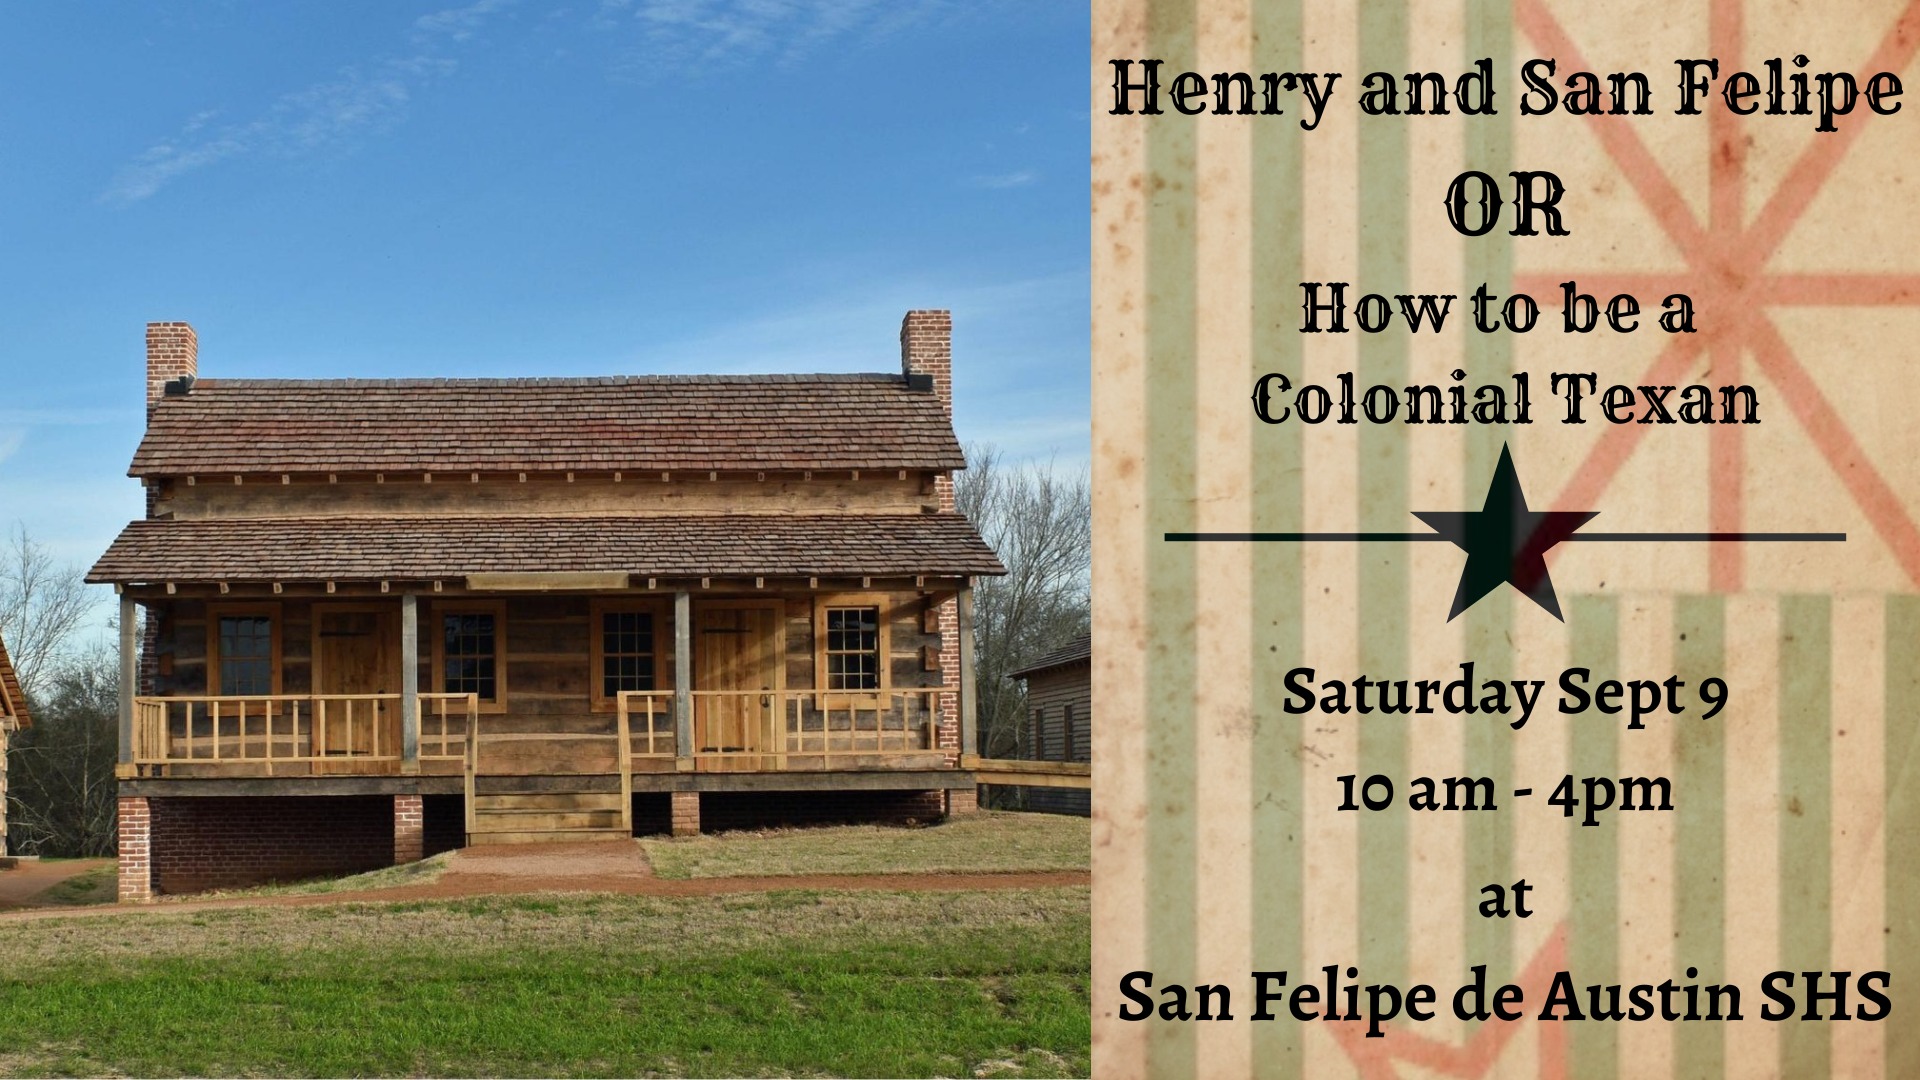 Henry and San Felipe OR How to become a Colonial Texan